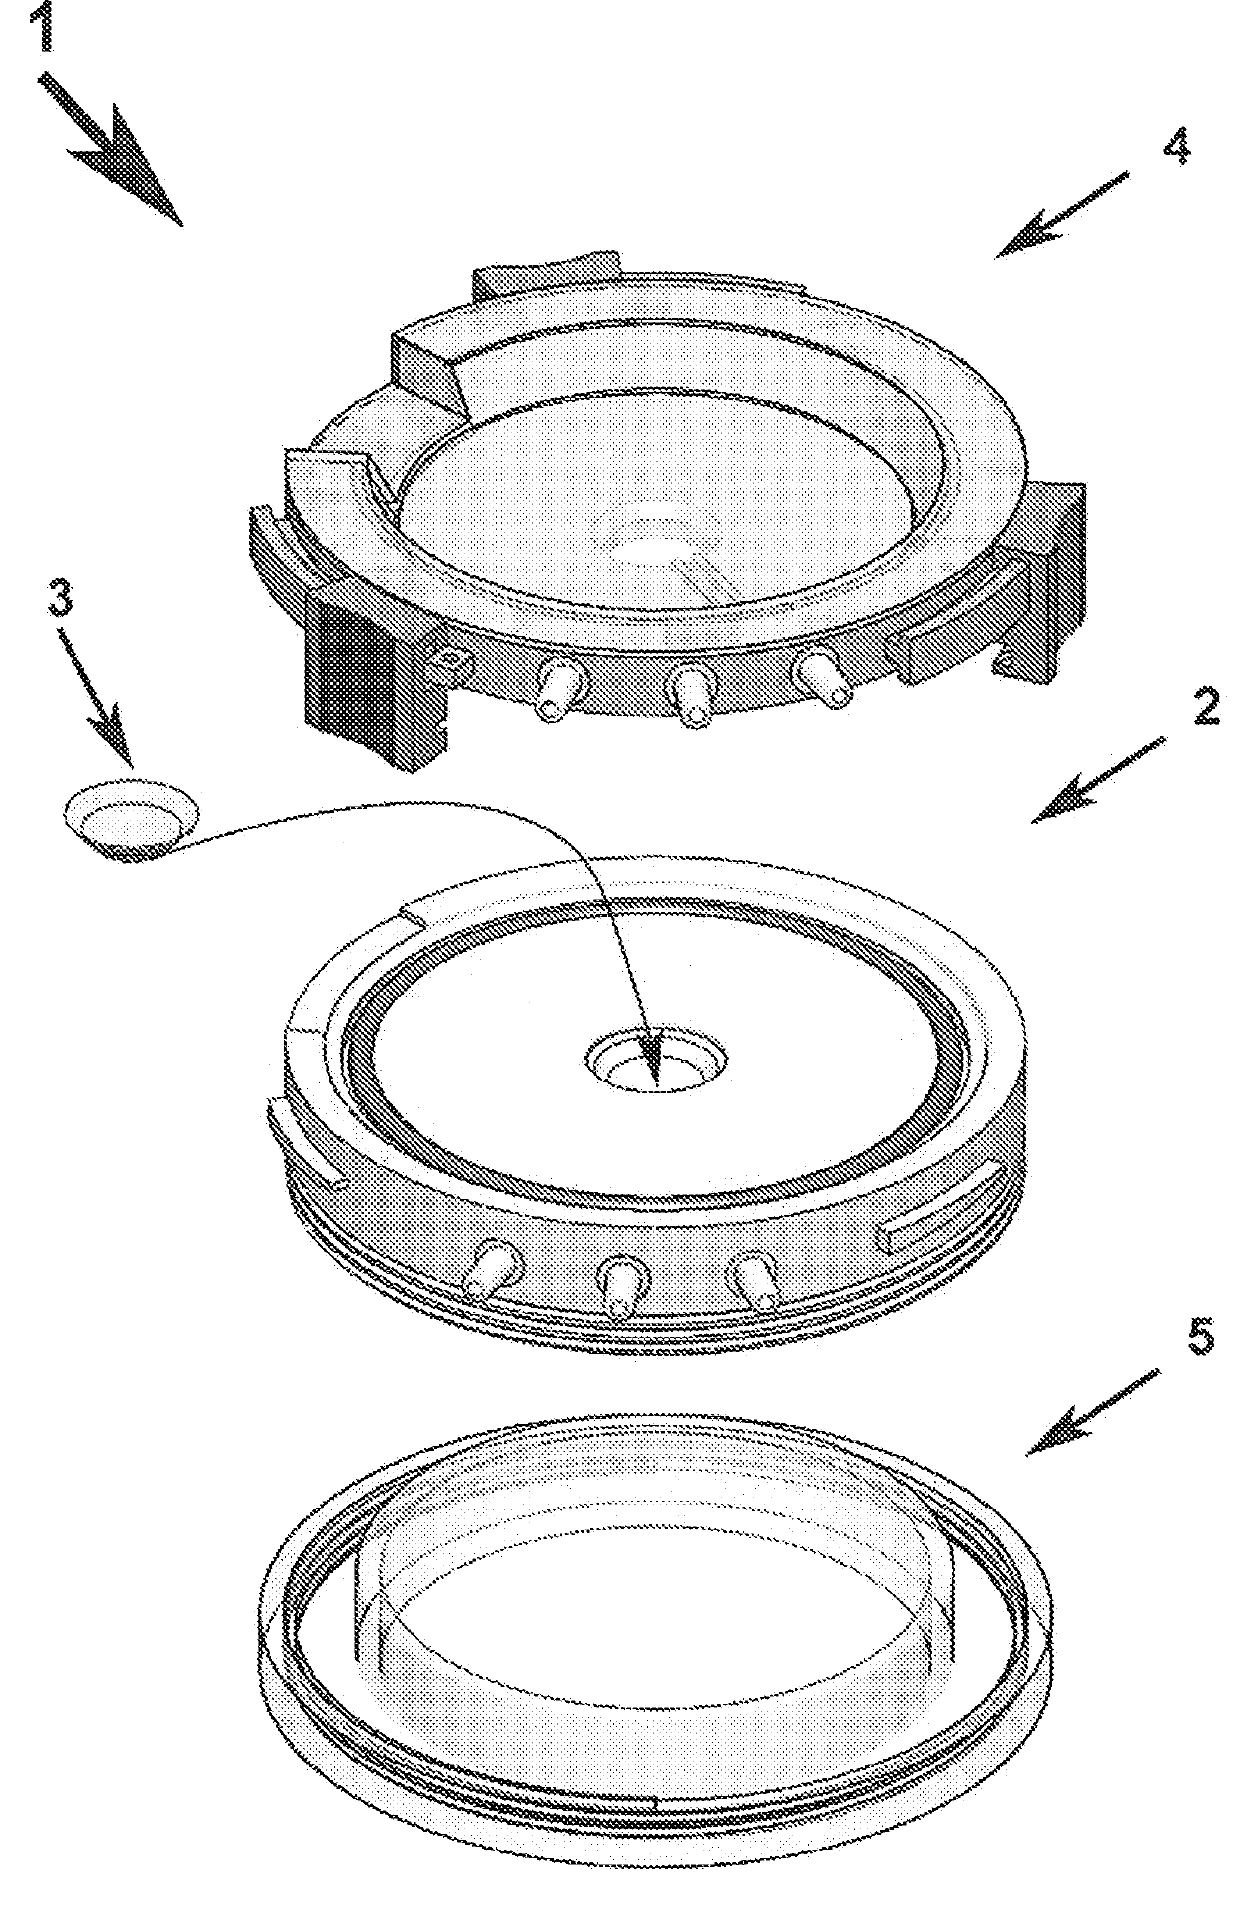 Medical device intended for the long-term storage of a cornea, or for ex vivo experimentation on a human or animal cornea